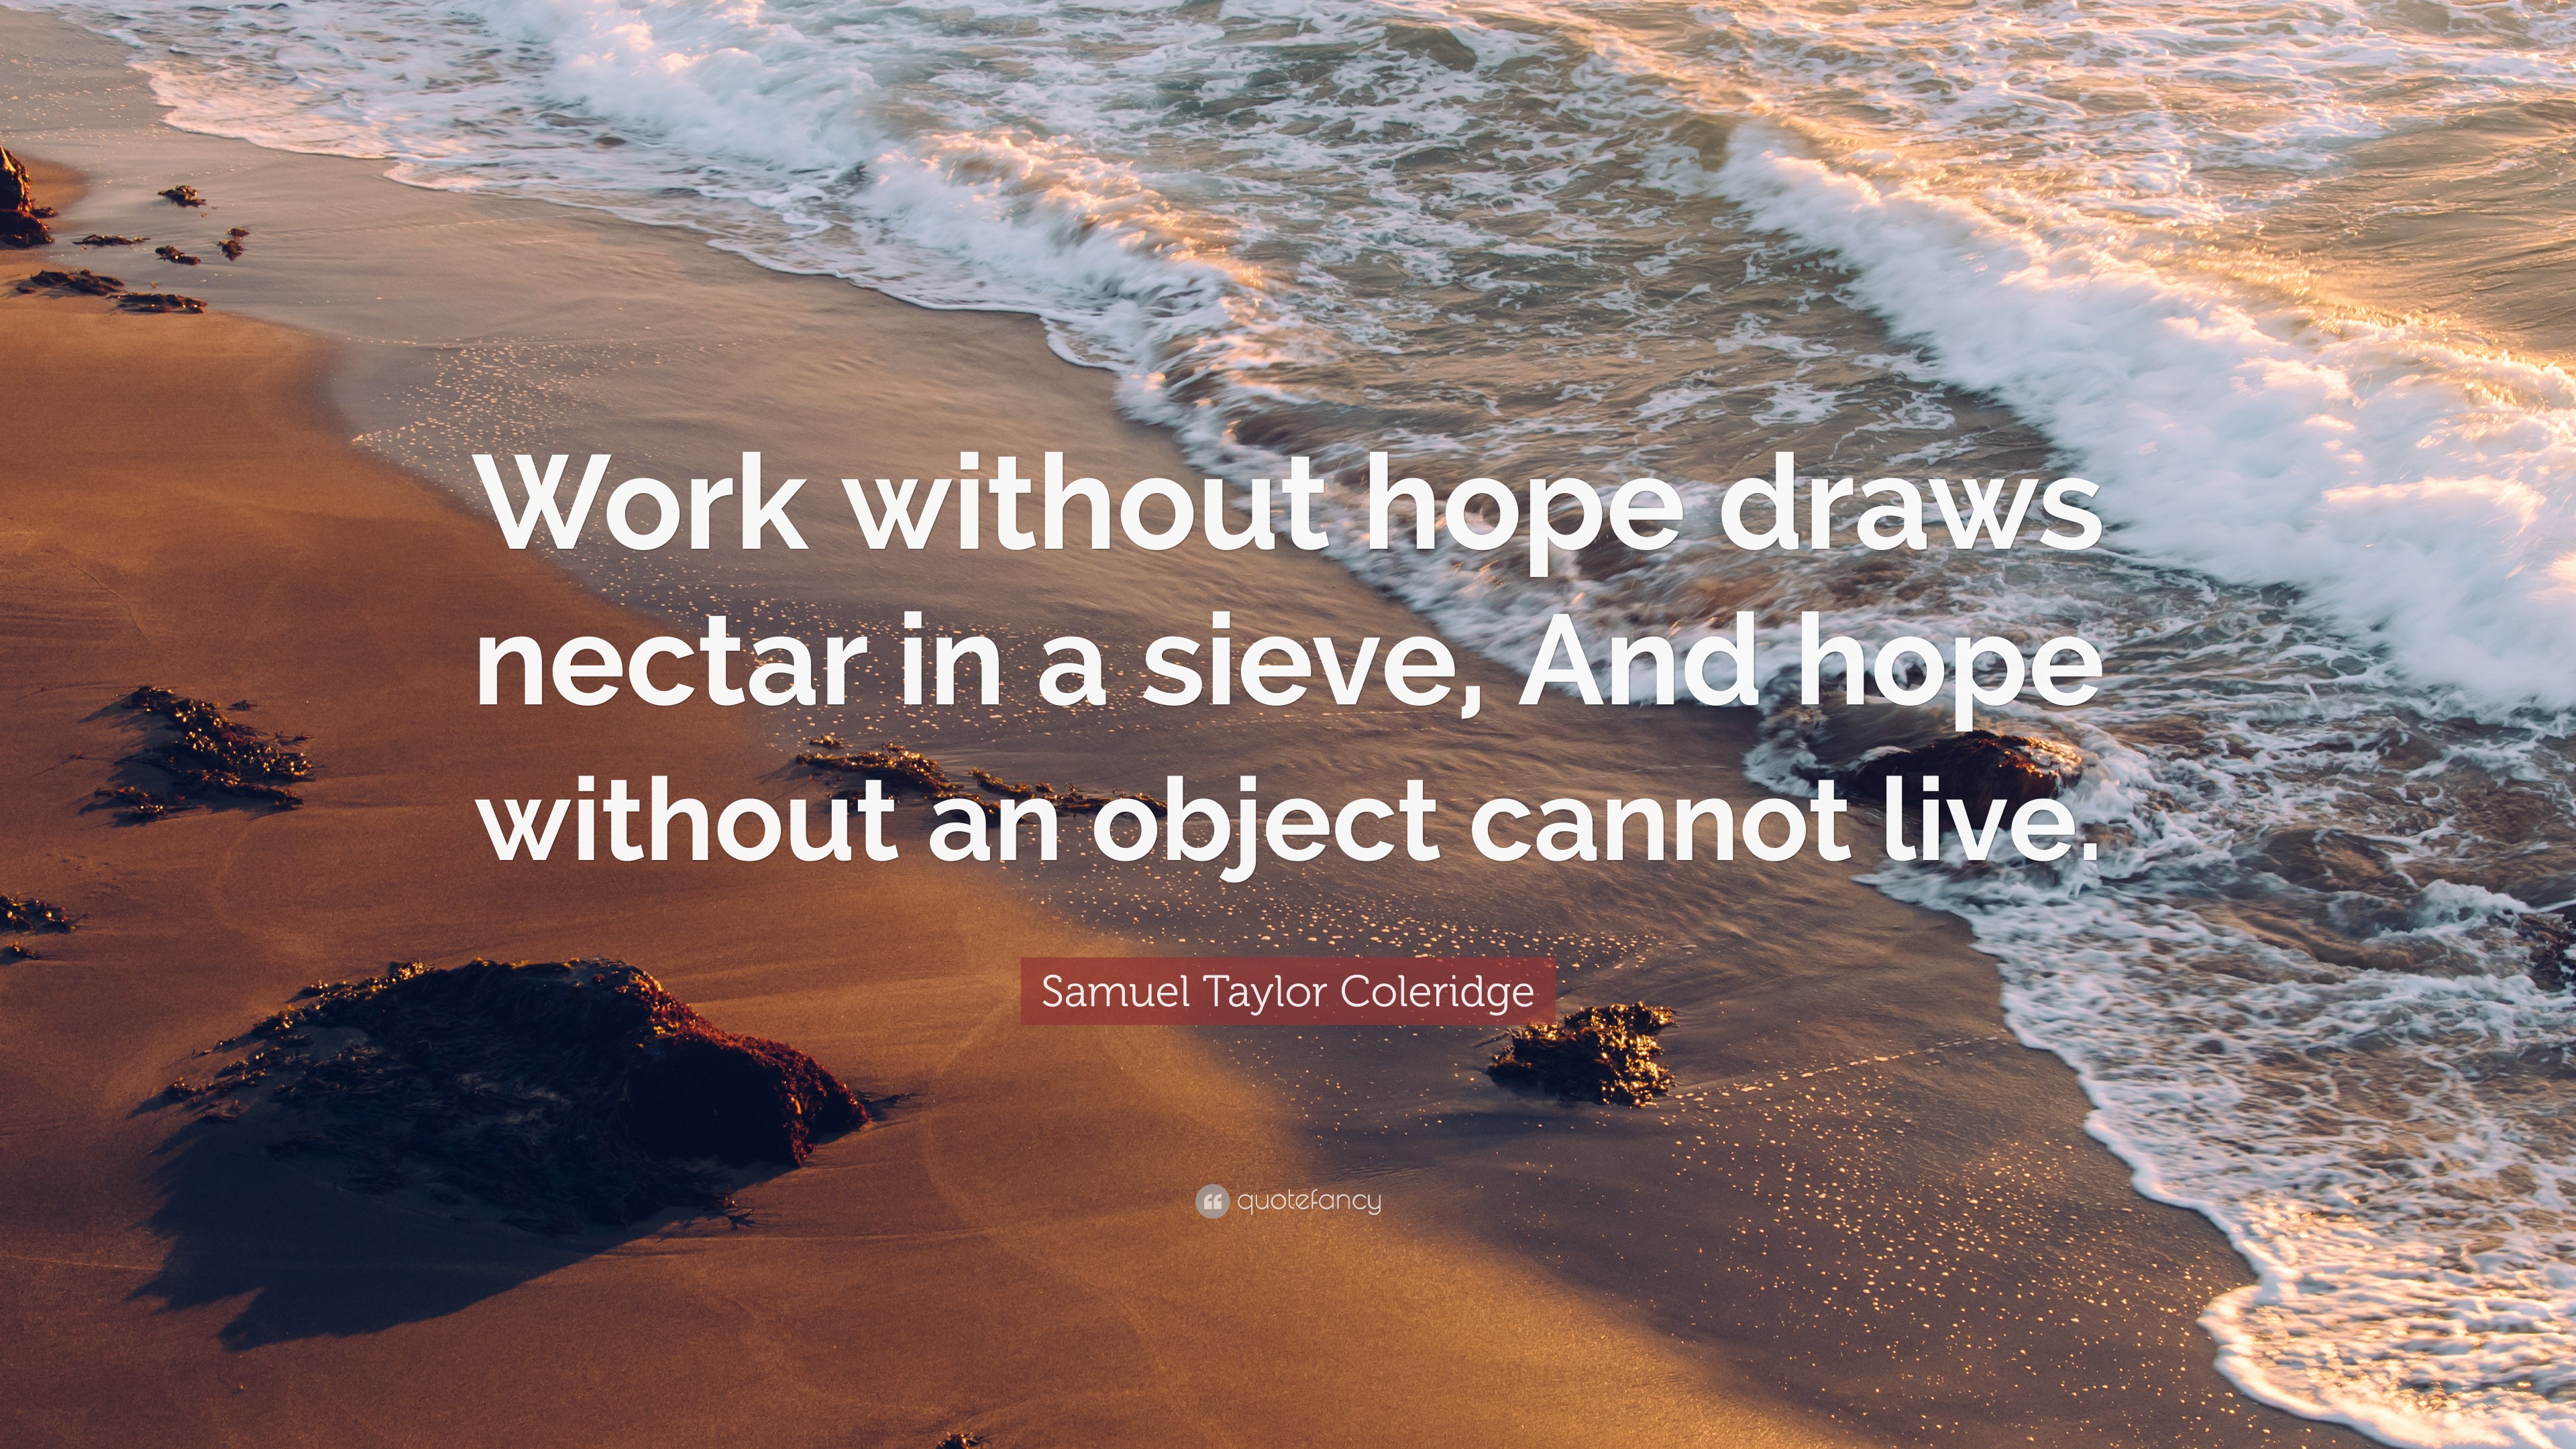 Samuel Taylor Coleridge Quote: “Work without hope draws nectar in a sieve, And hope ...3840 x 2160